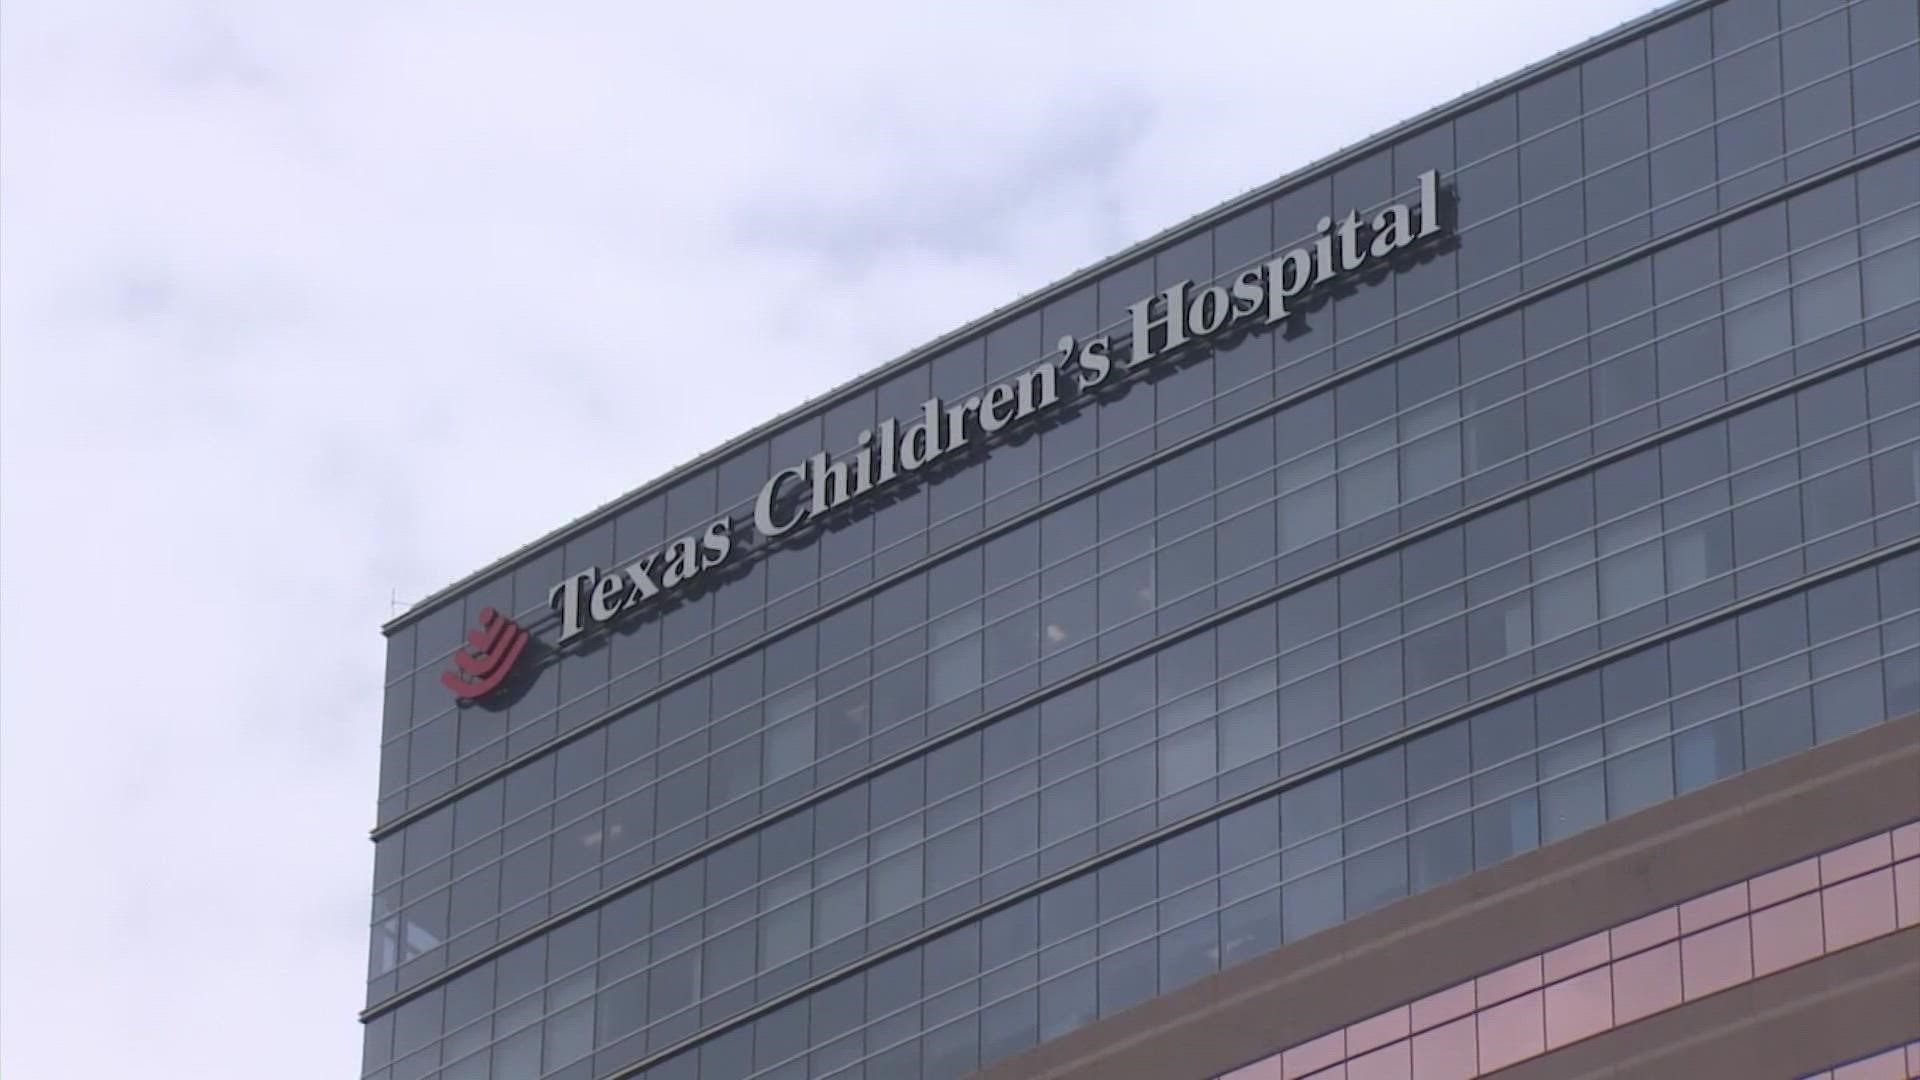 DSHS reports nearly 300 kids are hospitalized with COVID-19 in Texas right now, including 78 in the Houston region.